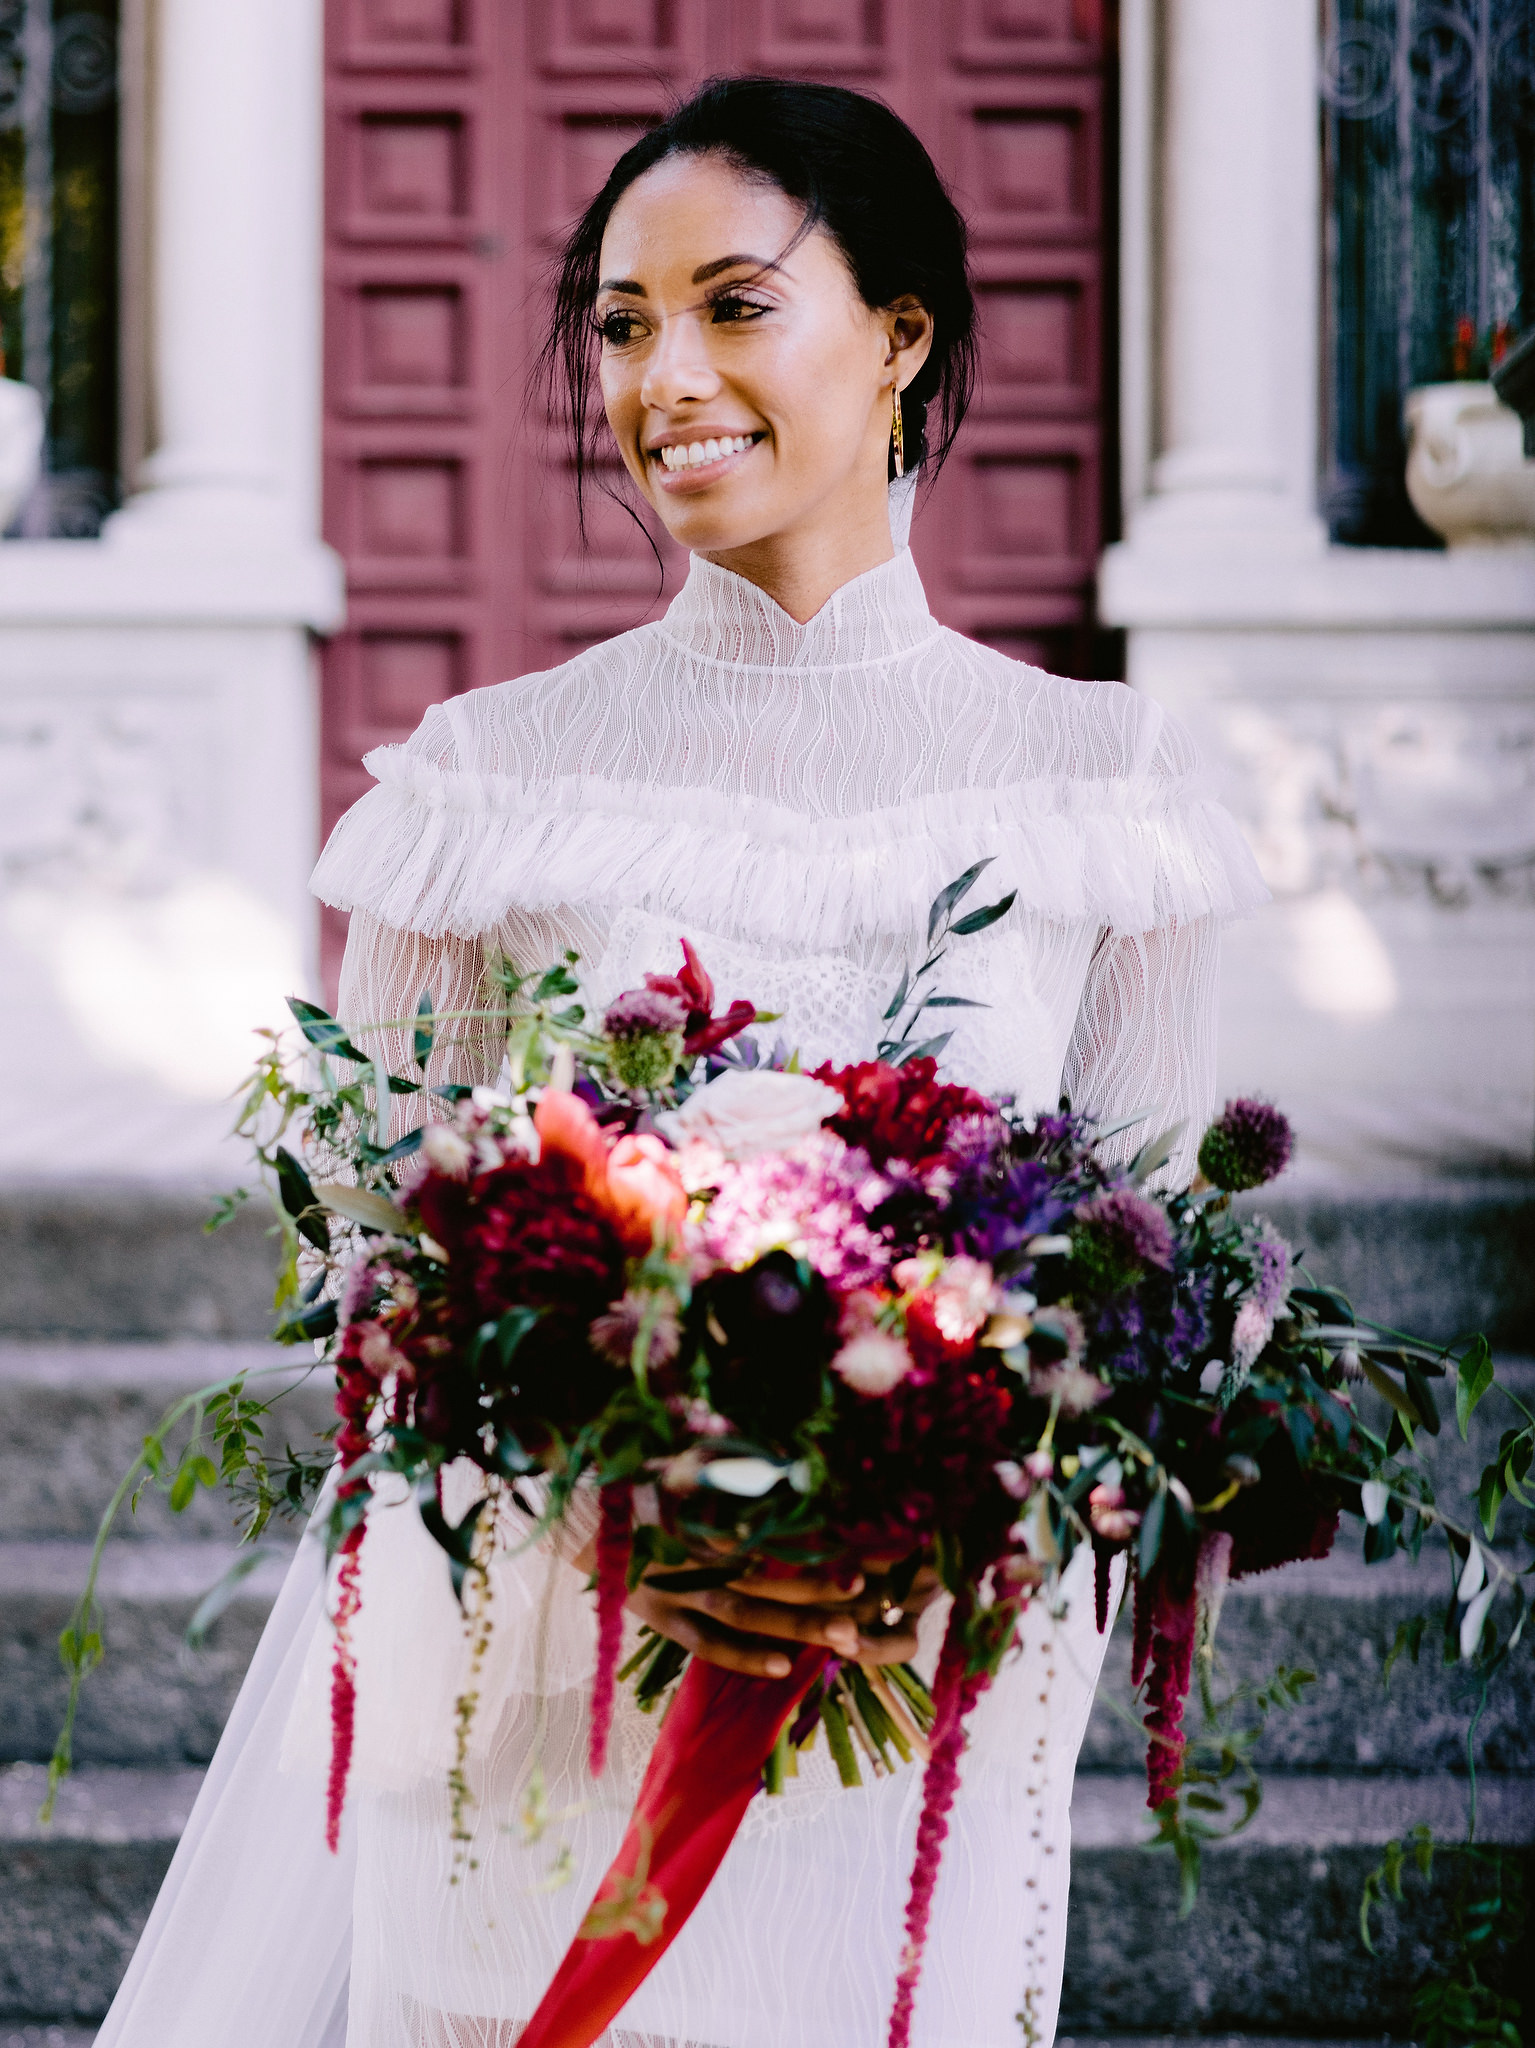 The bride is holding a beautiful bouquet with a mix of red, maroon, purple, and white flowers. Image by Jenny Fu Studio